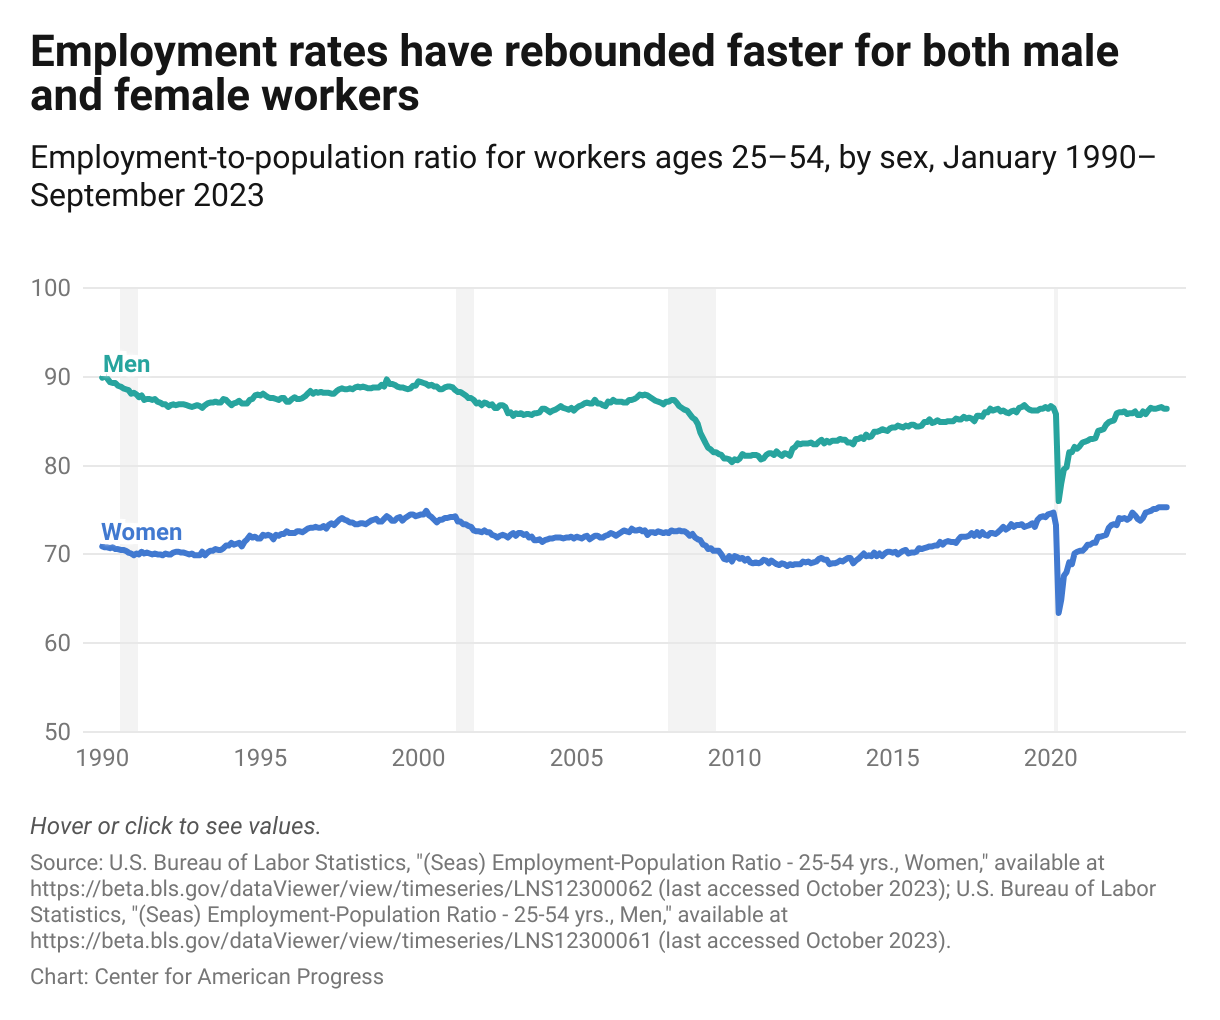 Chart showing that employment rates for both men and women ages 25–54 have exceeded or are near pre-pandemic levels; for example, employment rates for women were 75.3 percent in September 2023, higher than their February 2020 level of 74.7 percent.